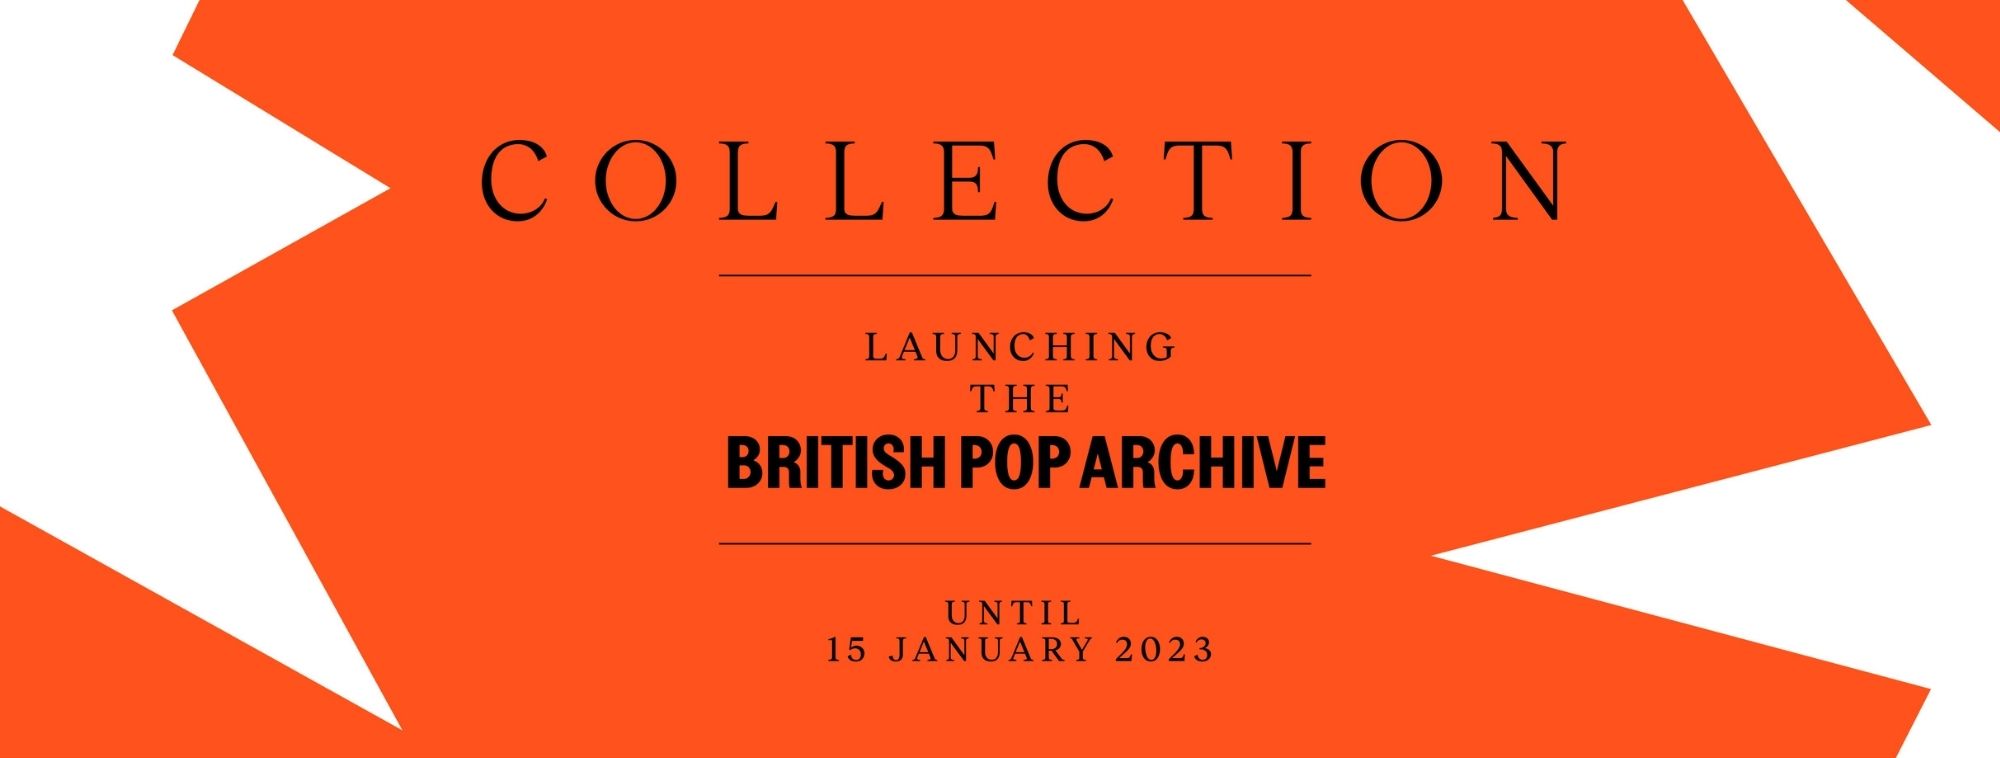 Collection: Launching the British Pop Archive